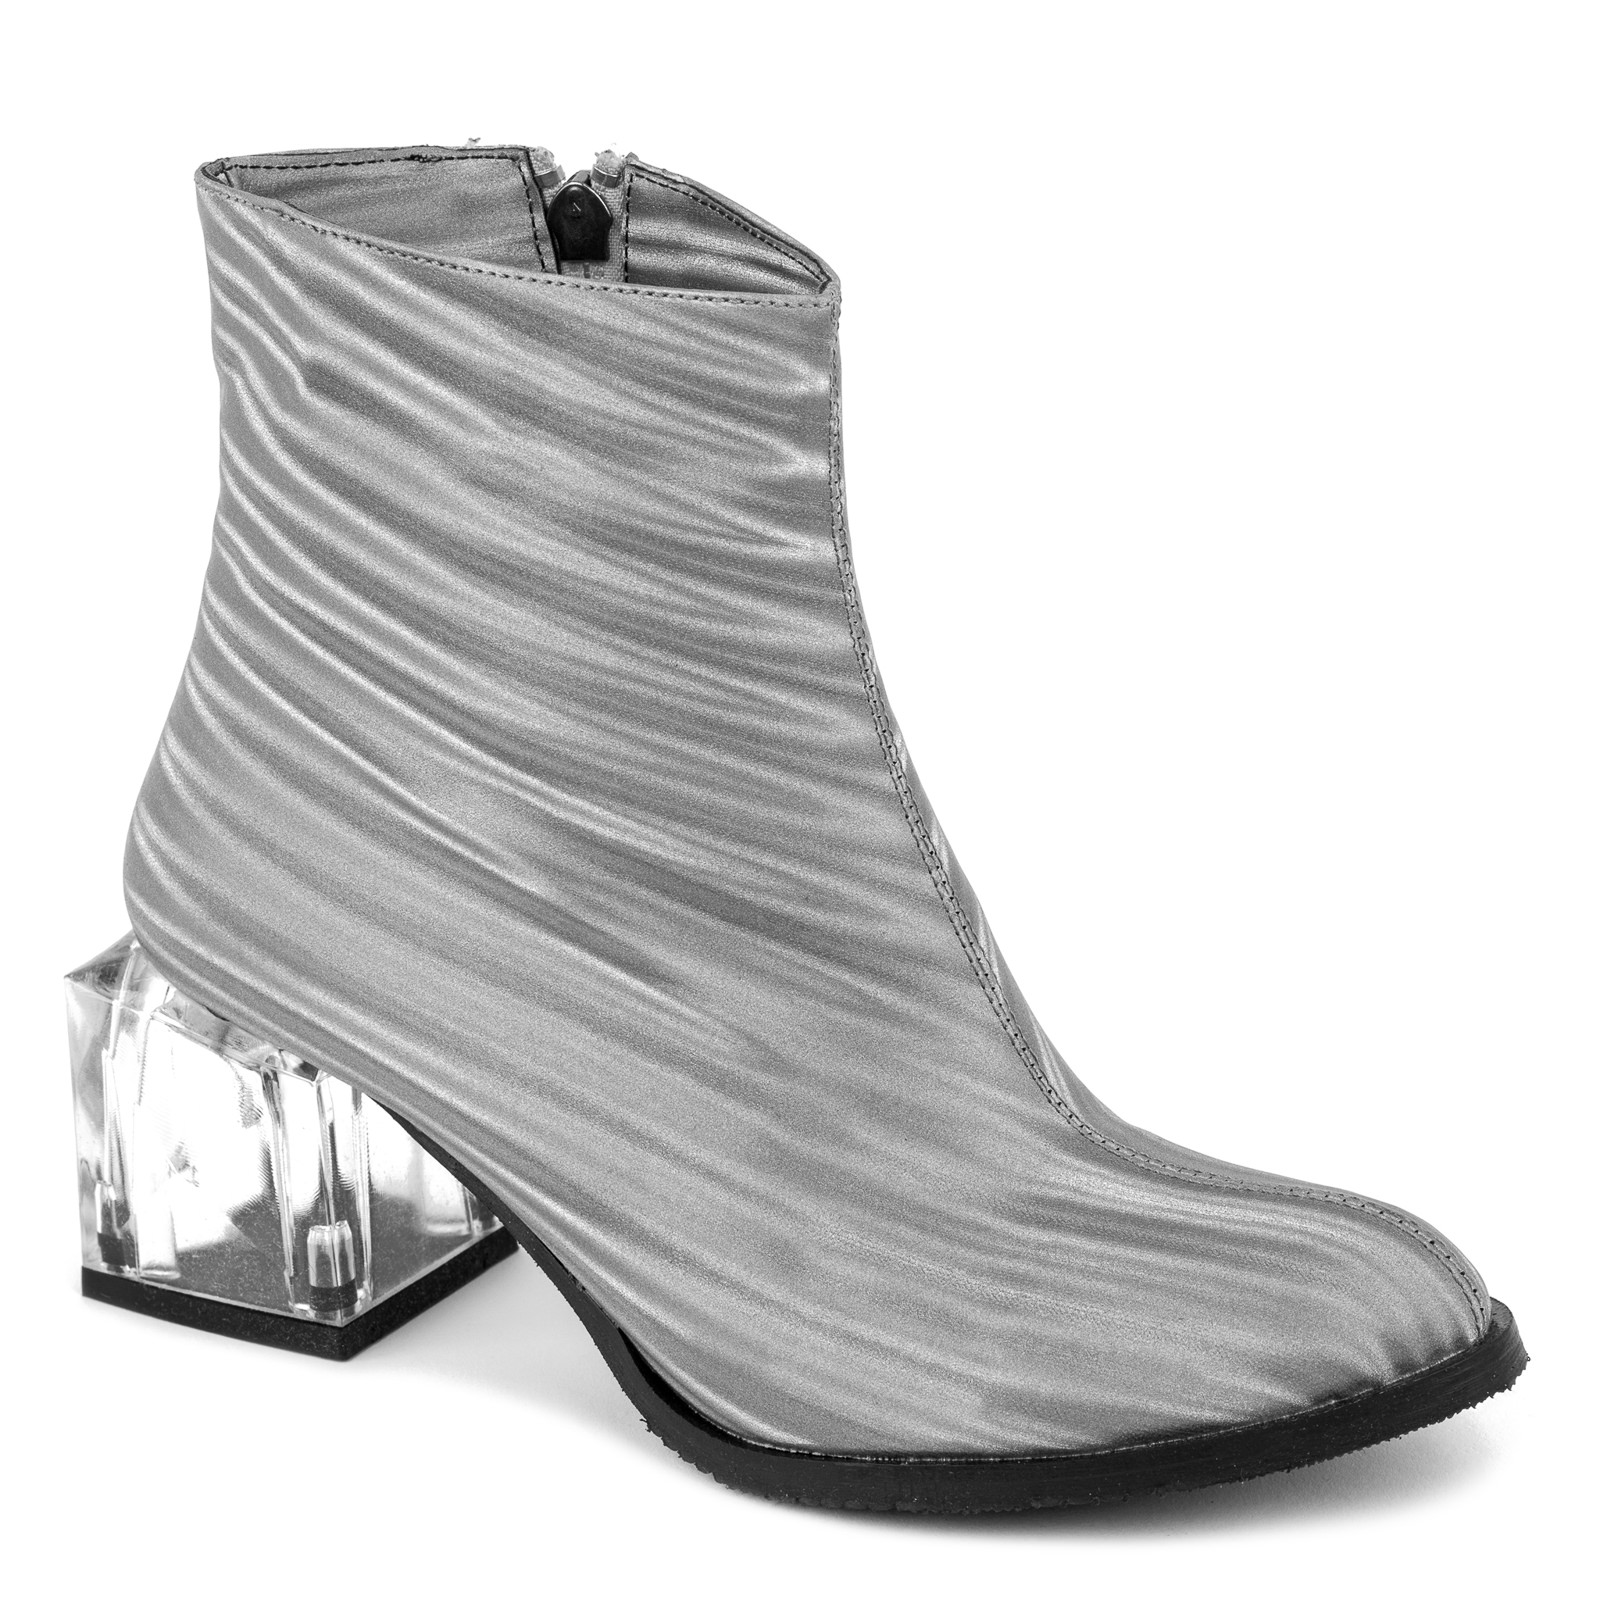 ANKLE BOOTS WITH CLEAR BLOCK HEEL - SILVER